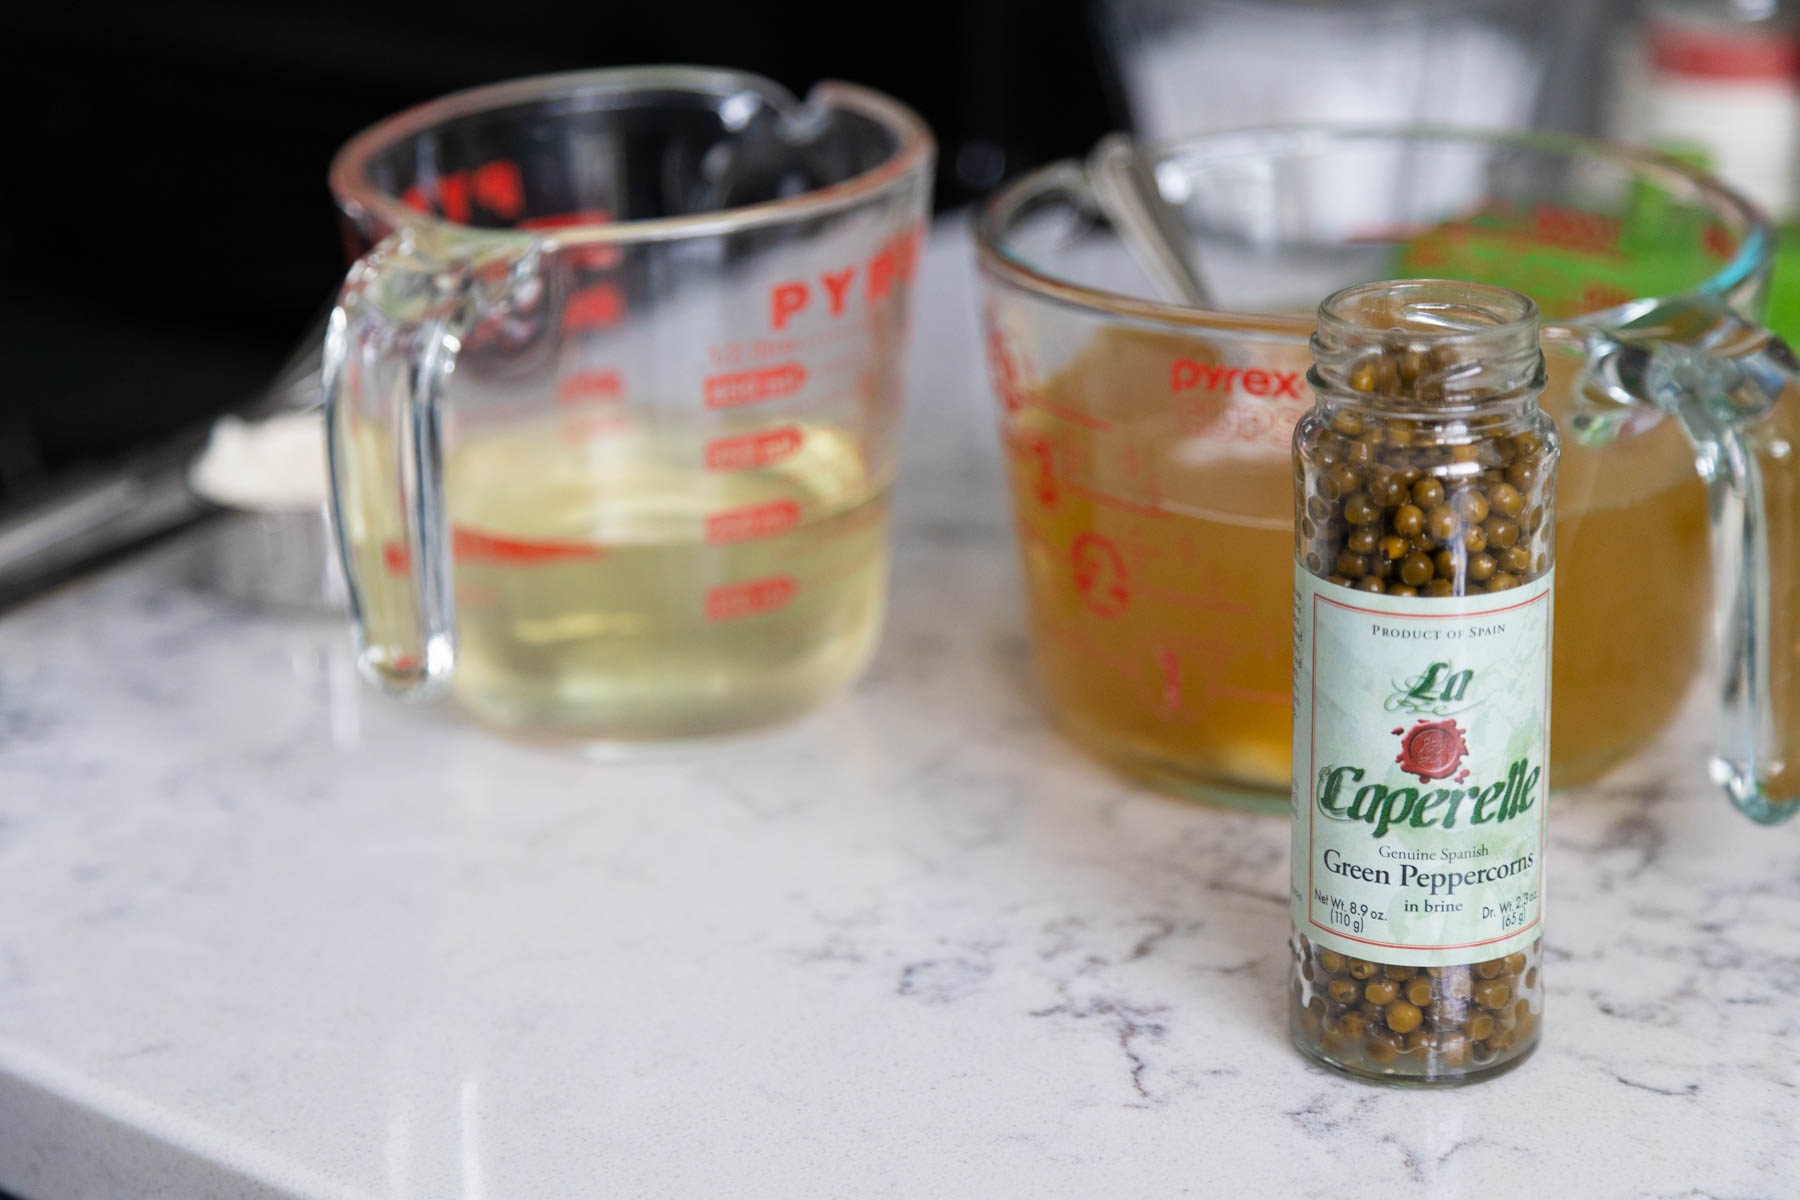 The jar of green peppercorns is near the measuring cup of wine and chicken stock.